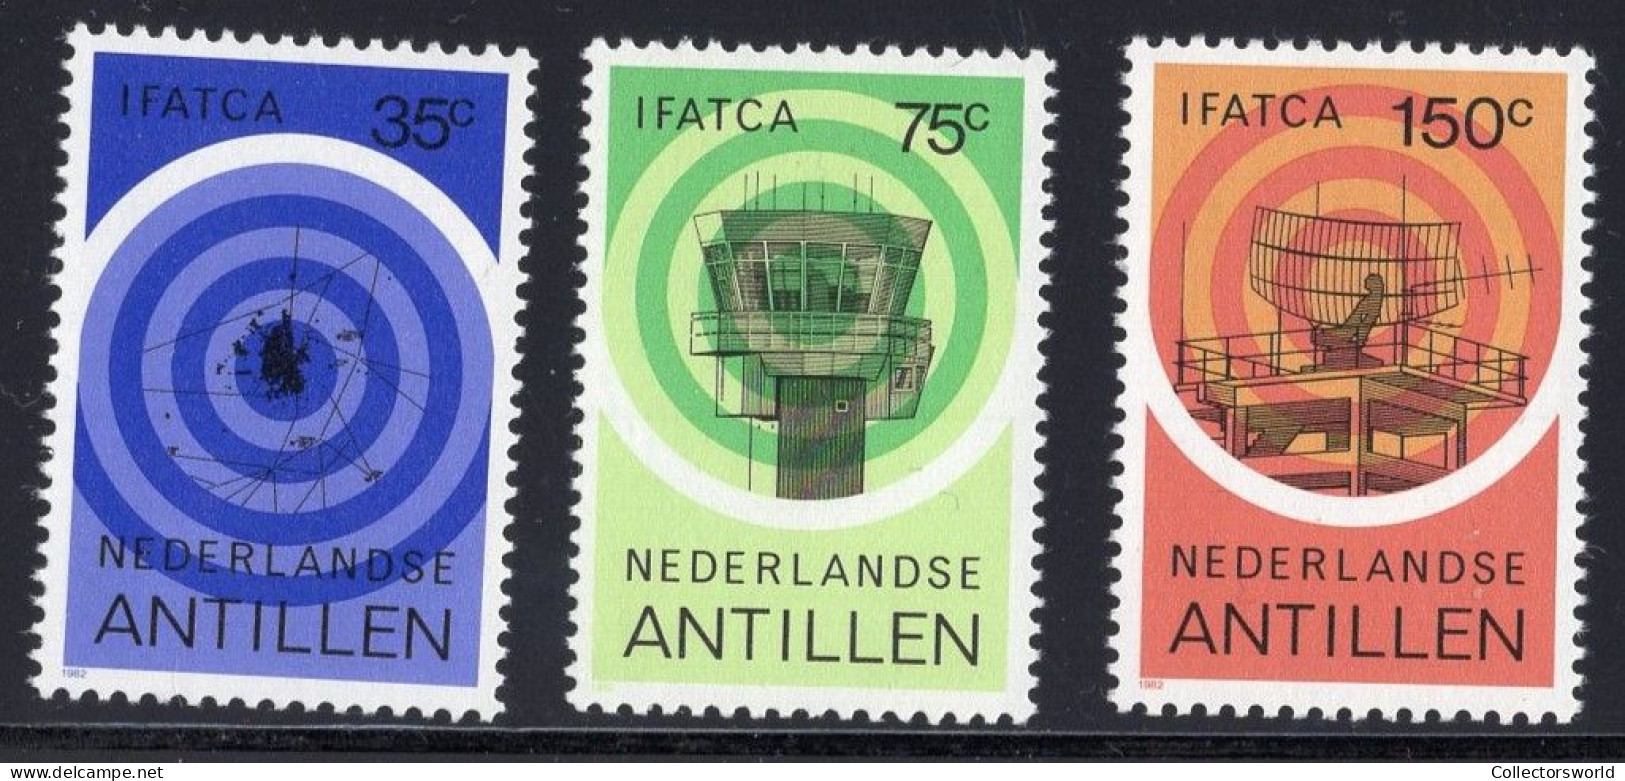 Netherlands Antilles 1982 Serie 3v International Traffic Controllers Year - Airport MNH - Antille